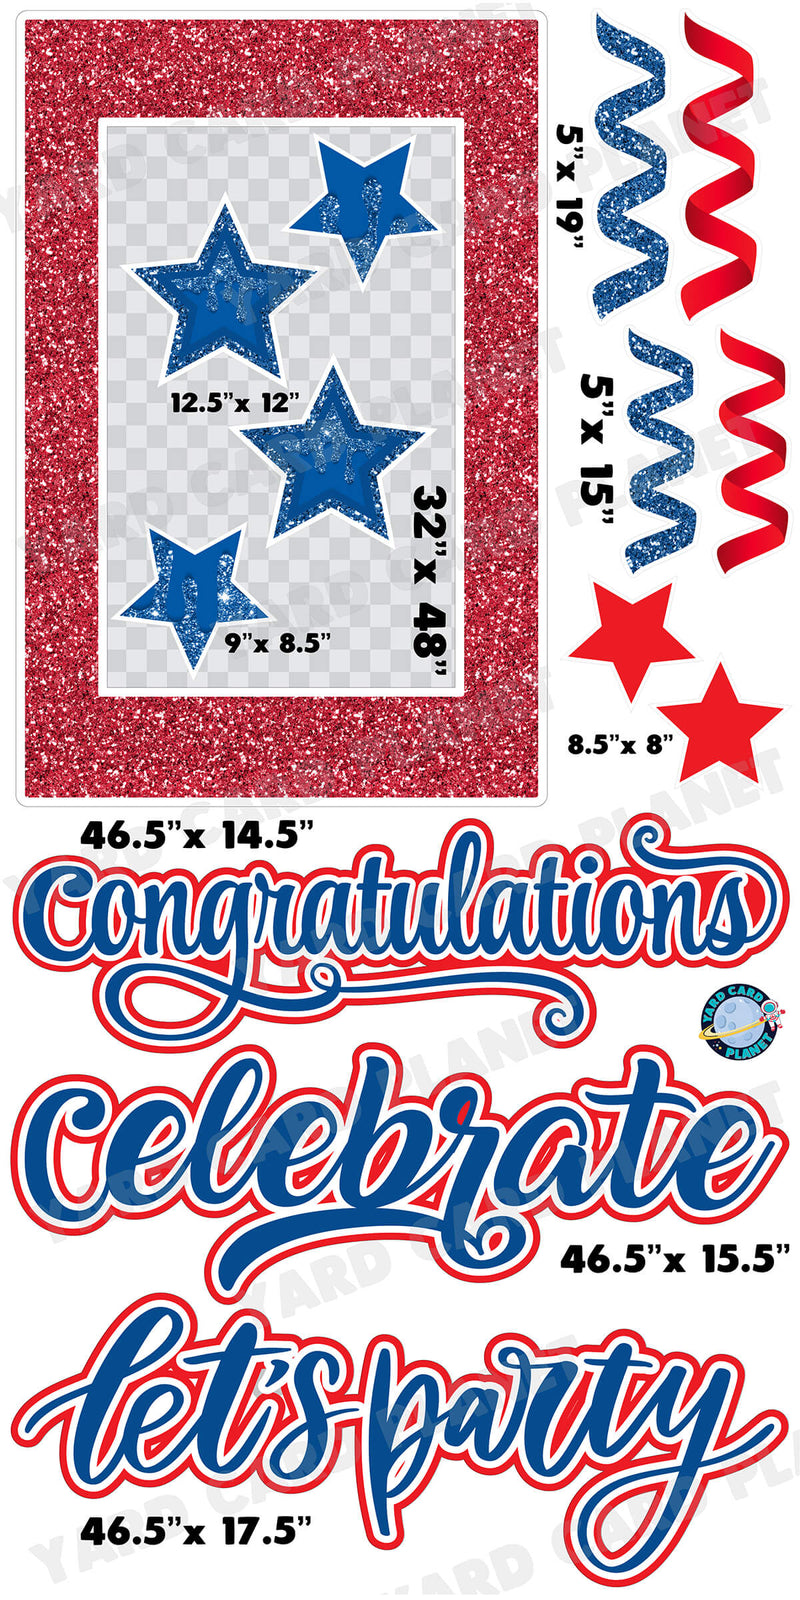 Red and Blue Glitter Multi Purpose EZ Frame with Interchangeable Greetings and Matching Yard Card Flair Set